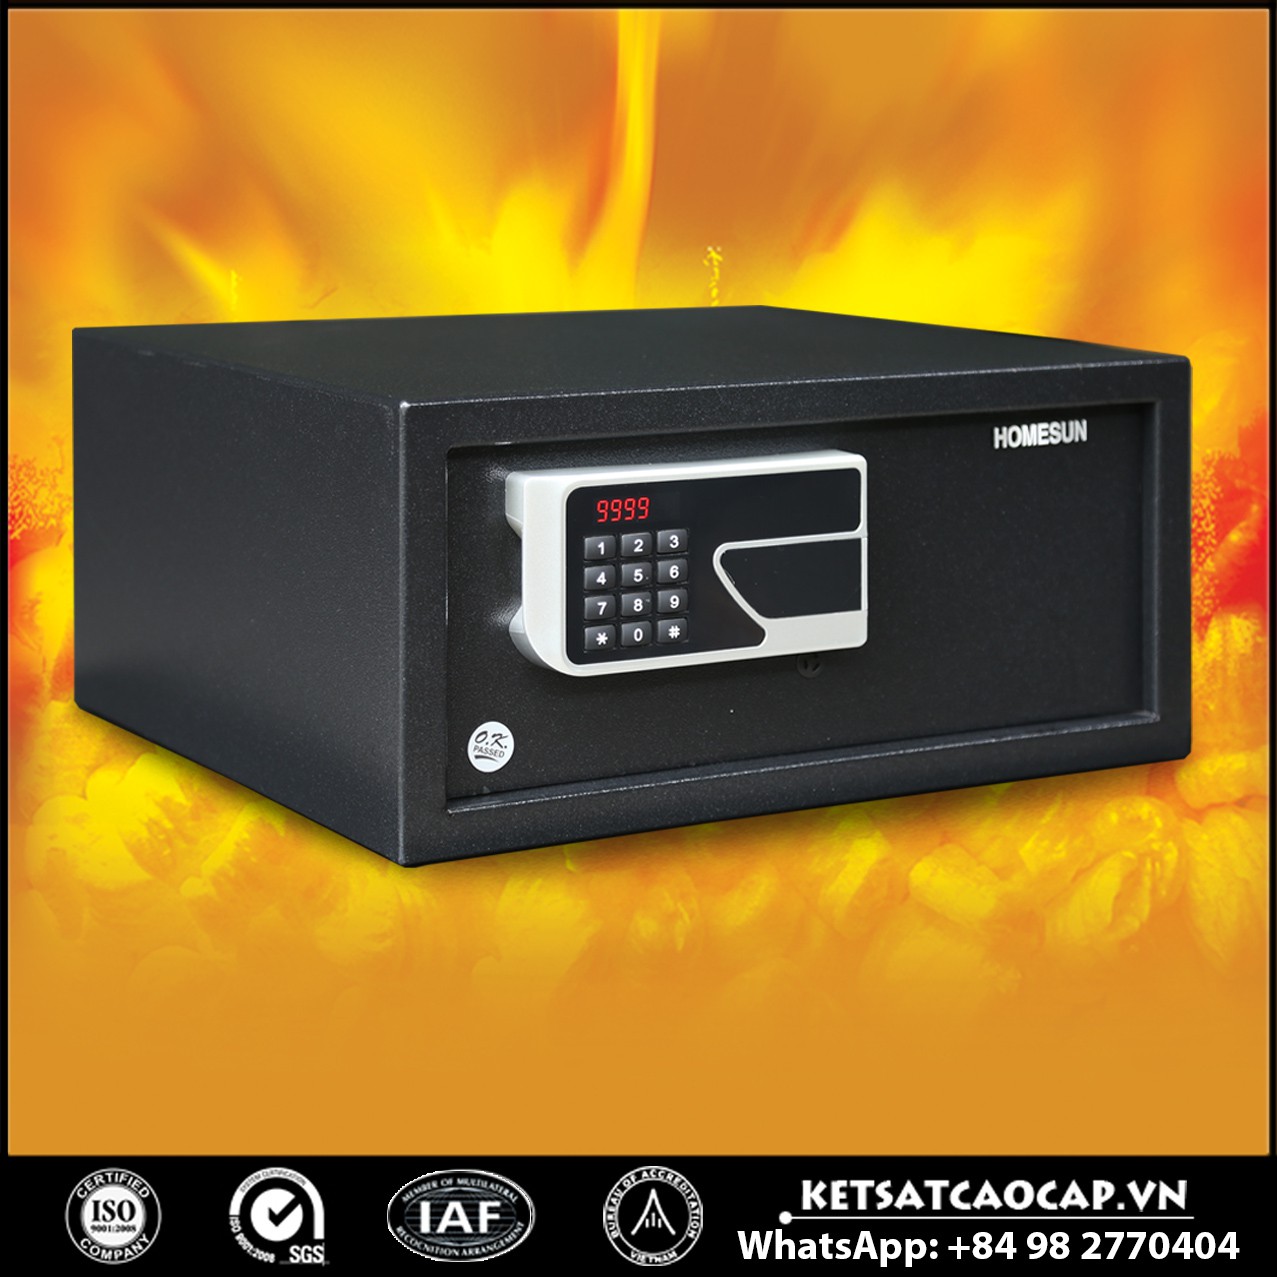 Used Hotel Safes Manufacturers